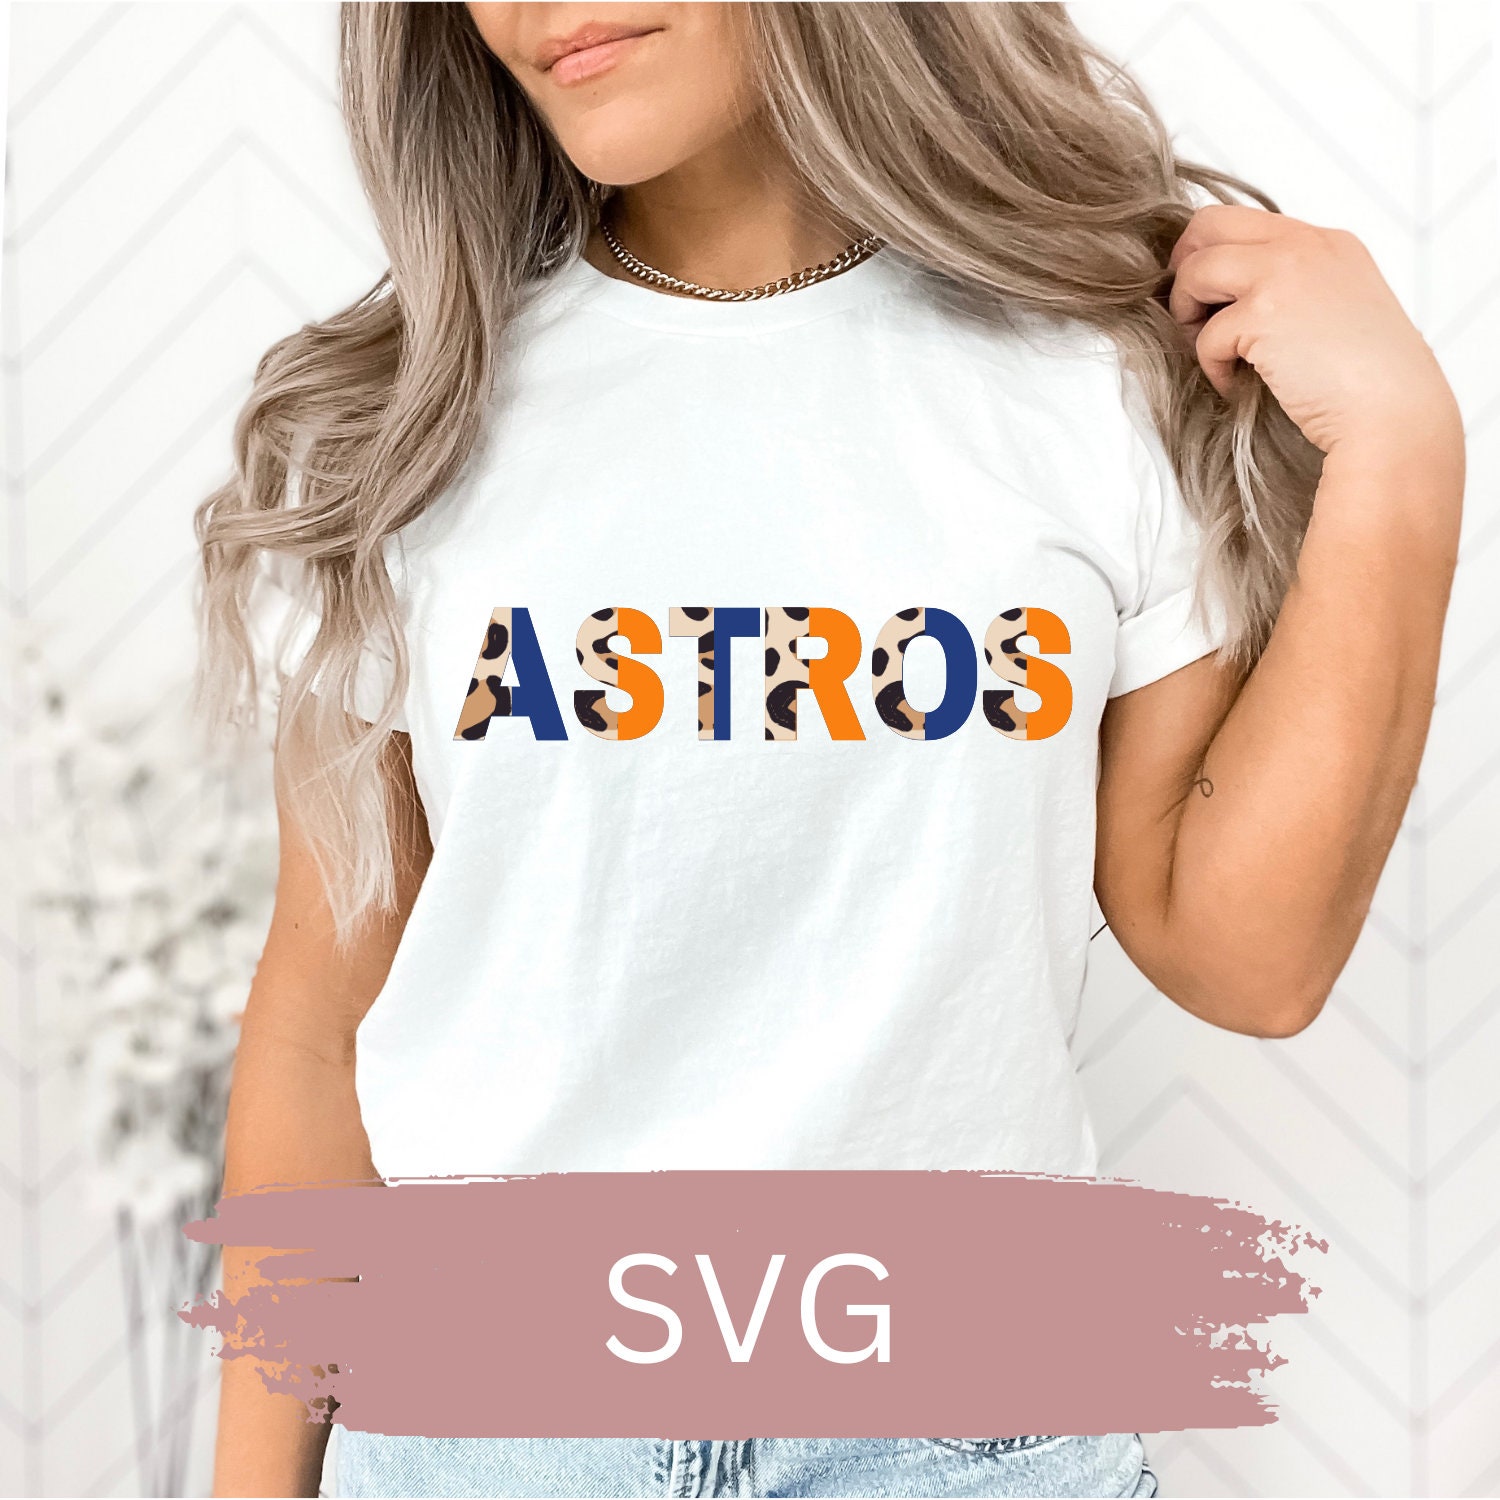 Buy Astros Womens Shirt Online In India -  India